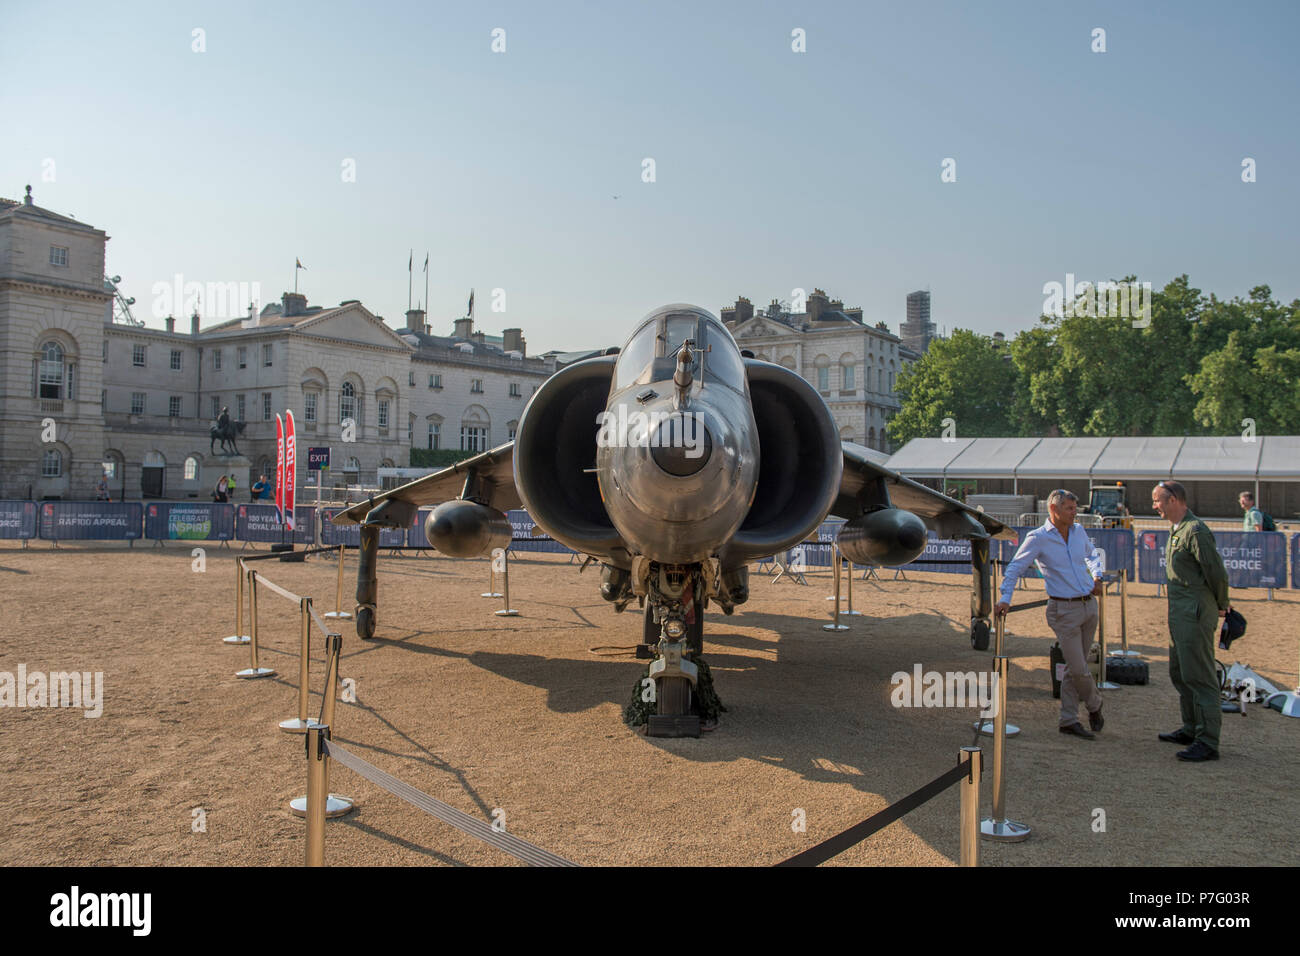 Horse Guards Parade, London, UK. 6 July, 2018. RAF100, an exhibition of aircraft covering the RAF’s history, from WW1 and WW2 through to the modern age are displayed at Horse Guards Parade in central London, open to the public from 11.00am on 6th till 9th July 2018. Harrier GR3, the famous British vertical takeoff jump jet and veteran of the Falklands War. Credit: Malcolm Park/Alamy Live News. Stock Photo